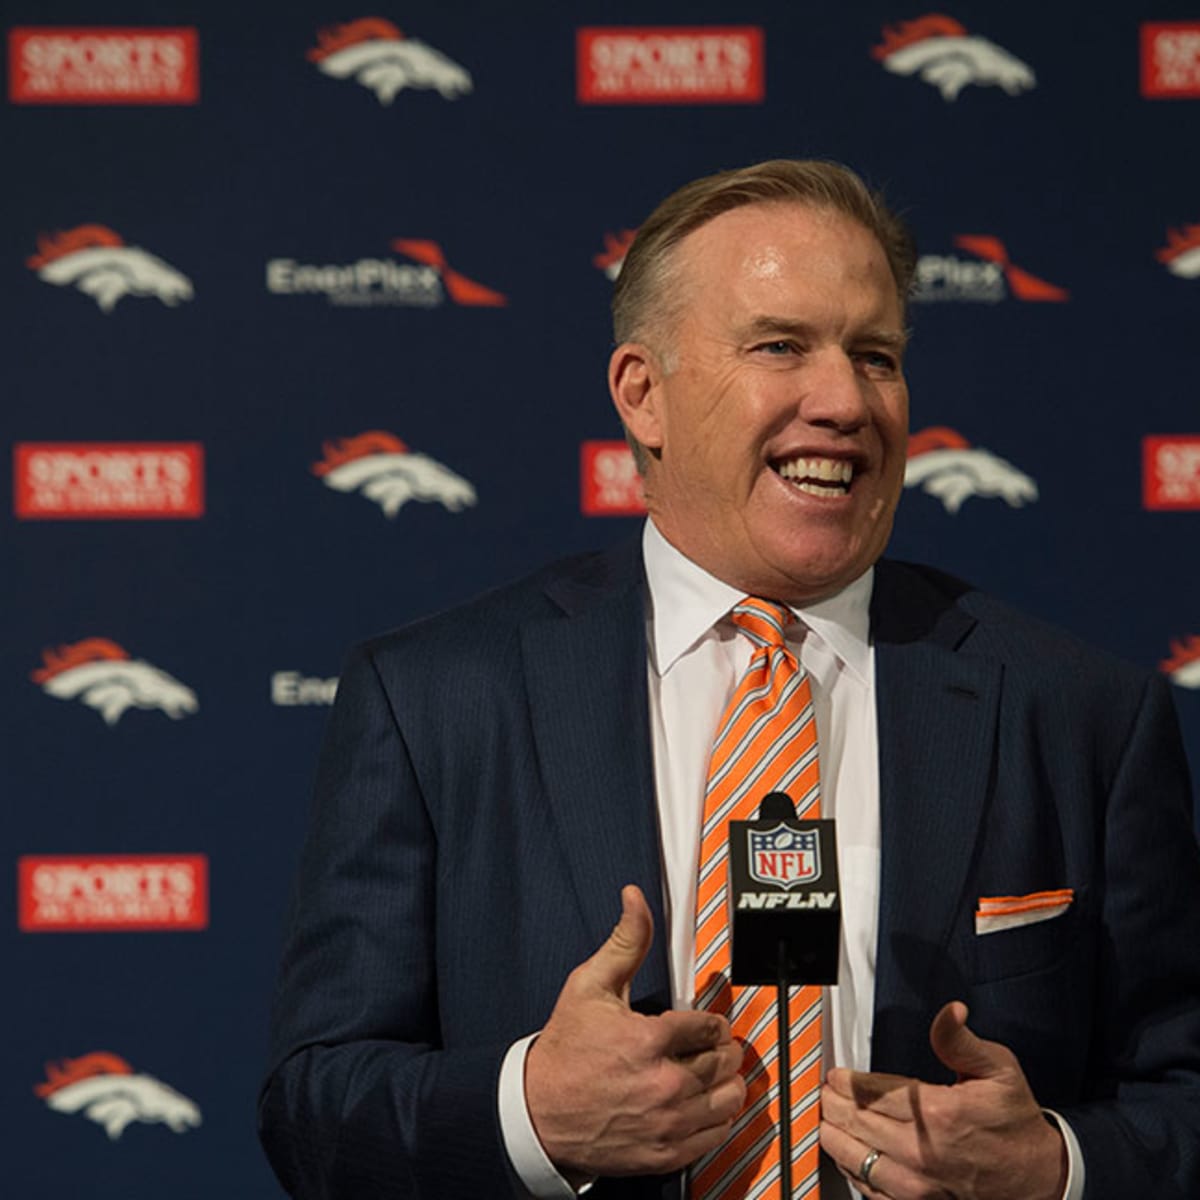 Q&A With Quarterback John Elway On What Life Is Like In The NFL